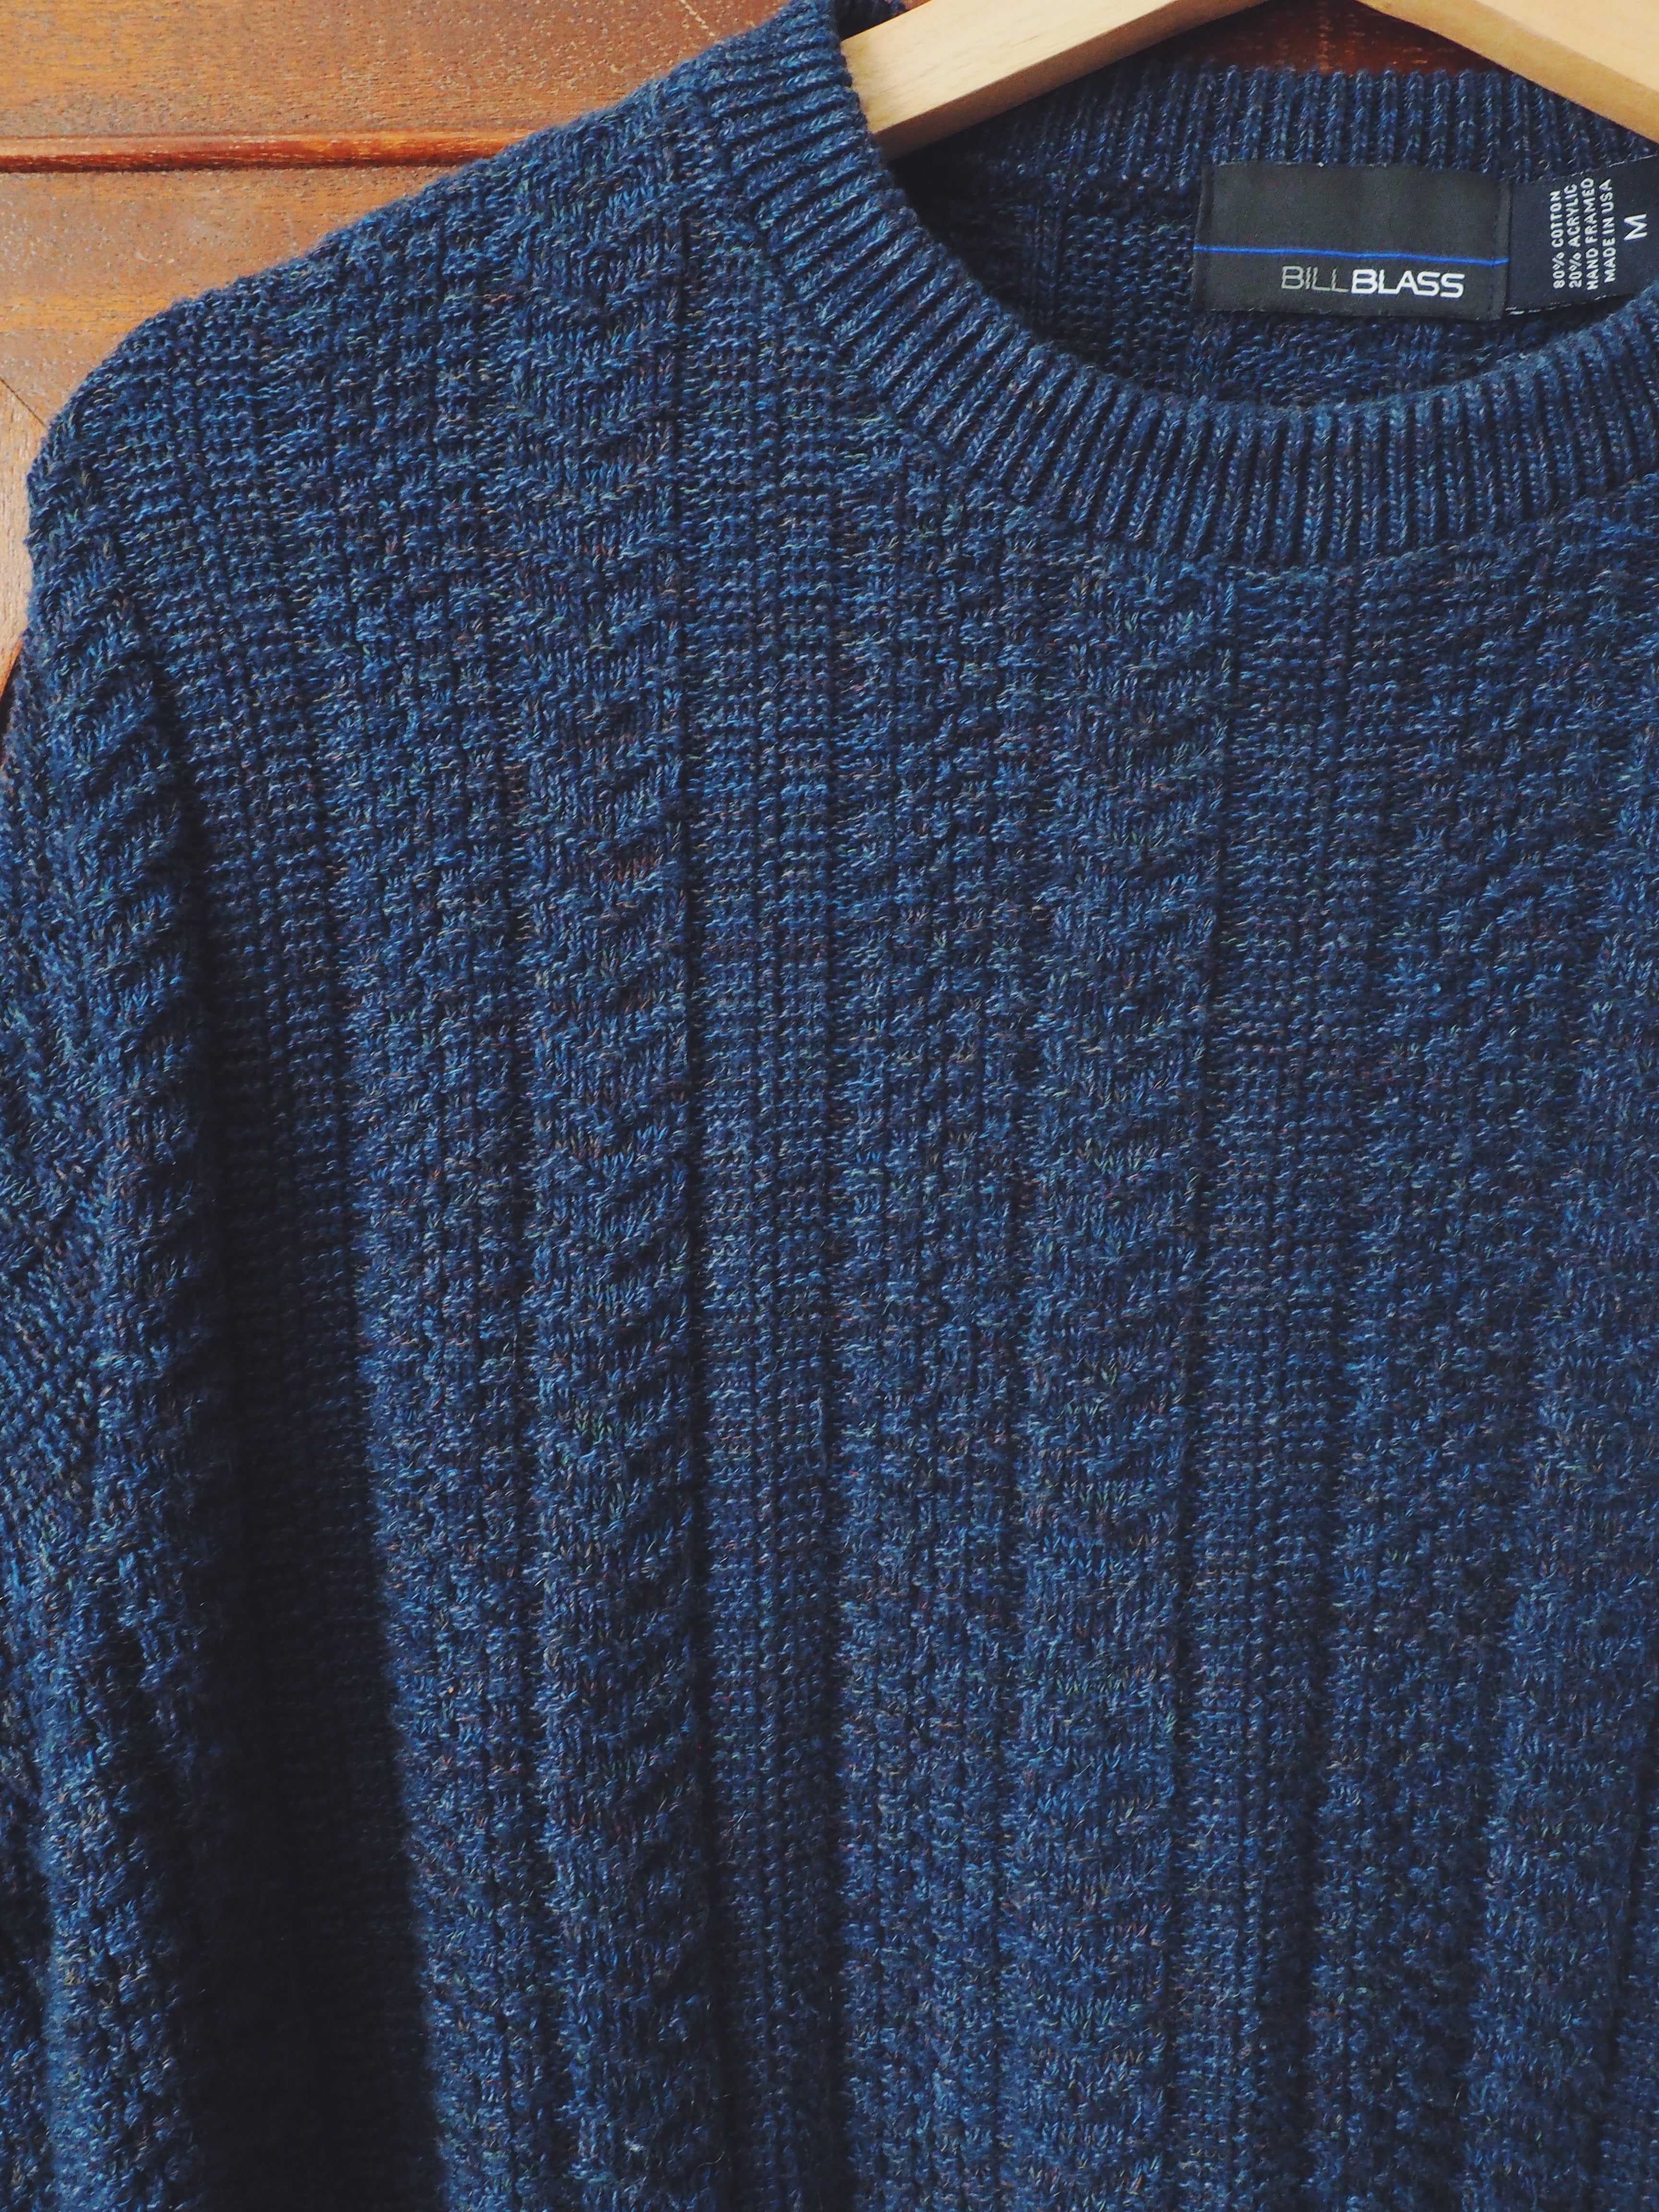 90s Men's Navy Cable-Knit Sweater